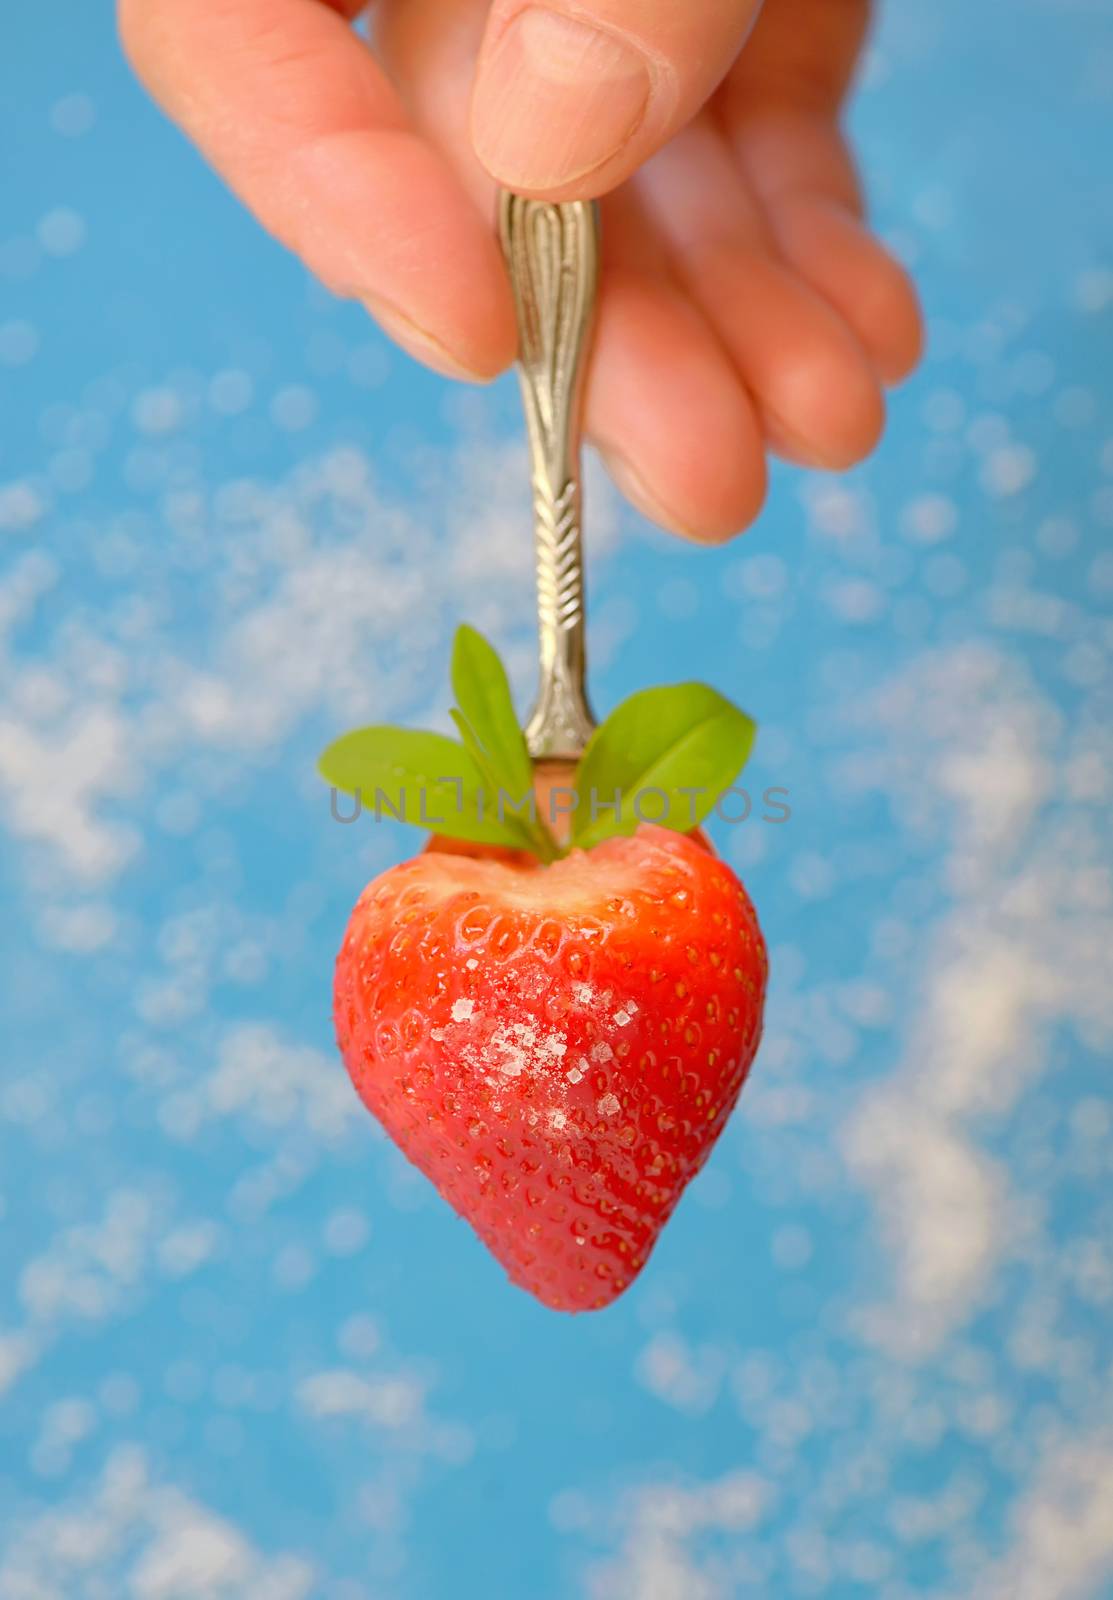 A heart shaped strawberry in spoon by mady70